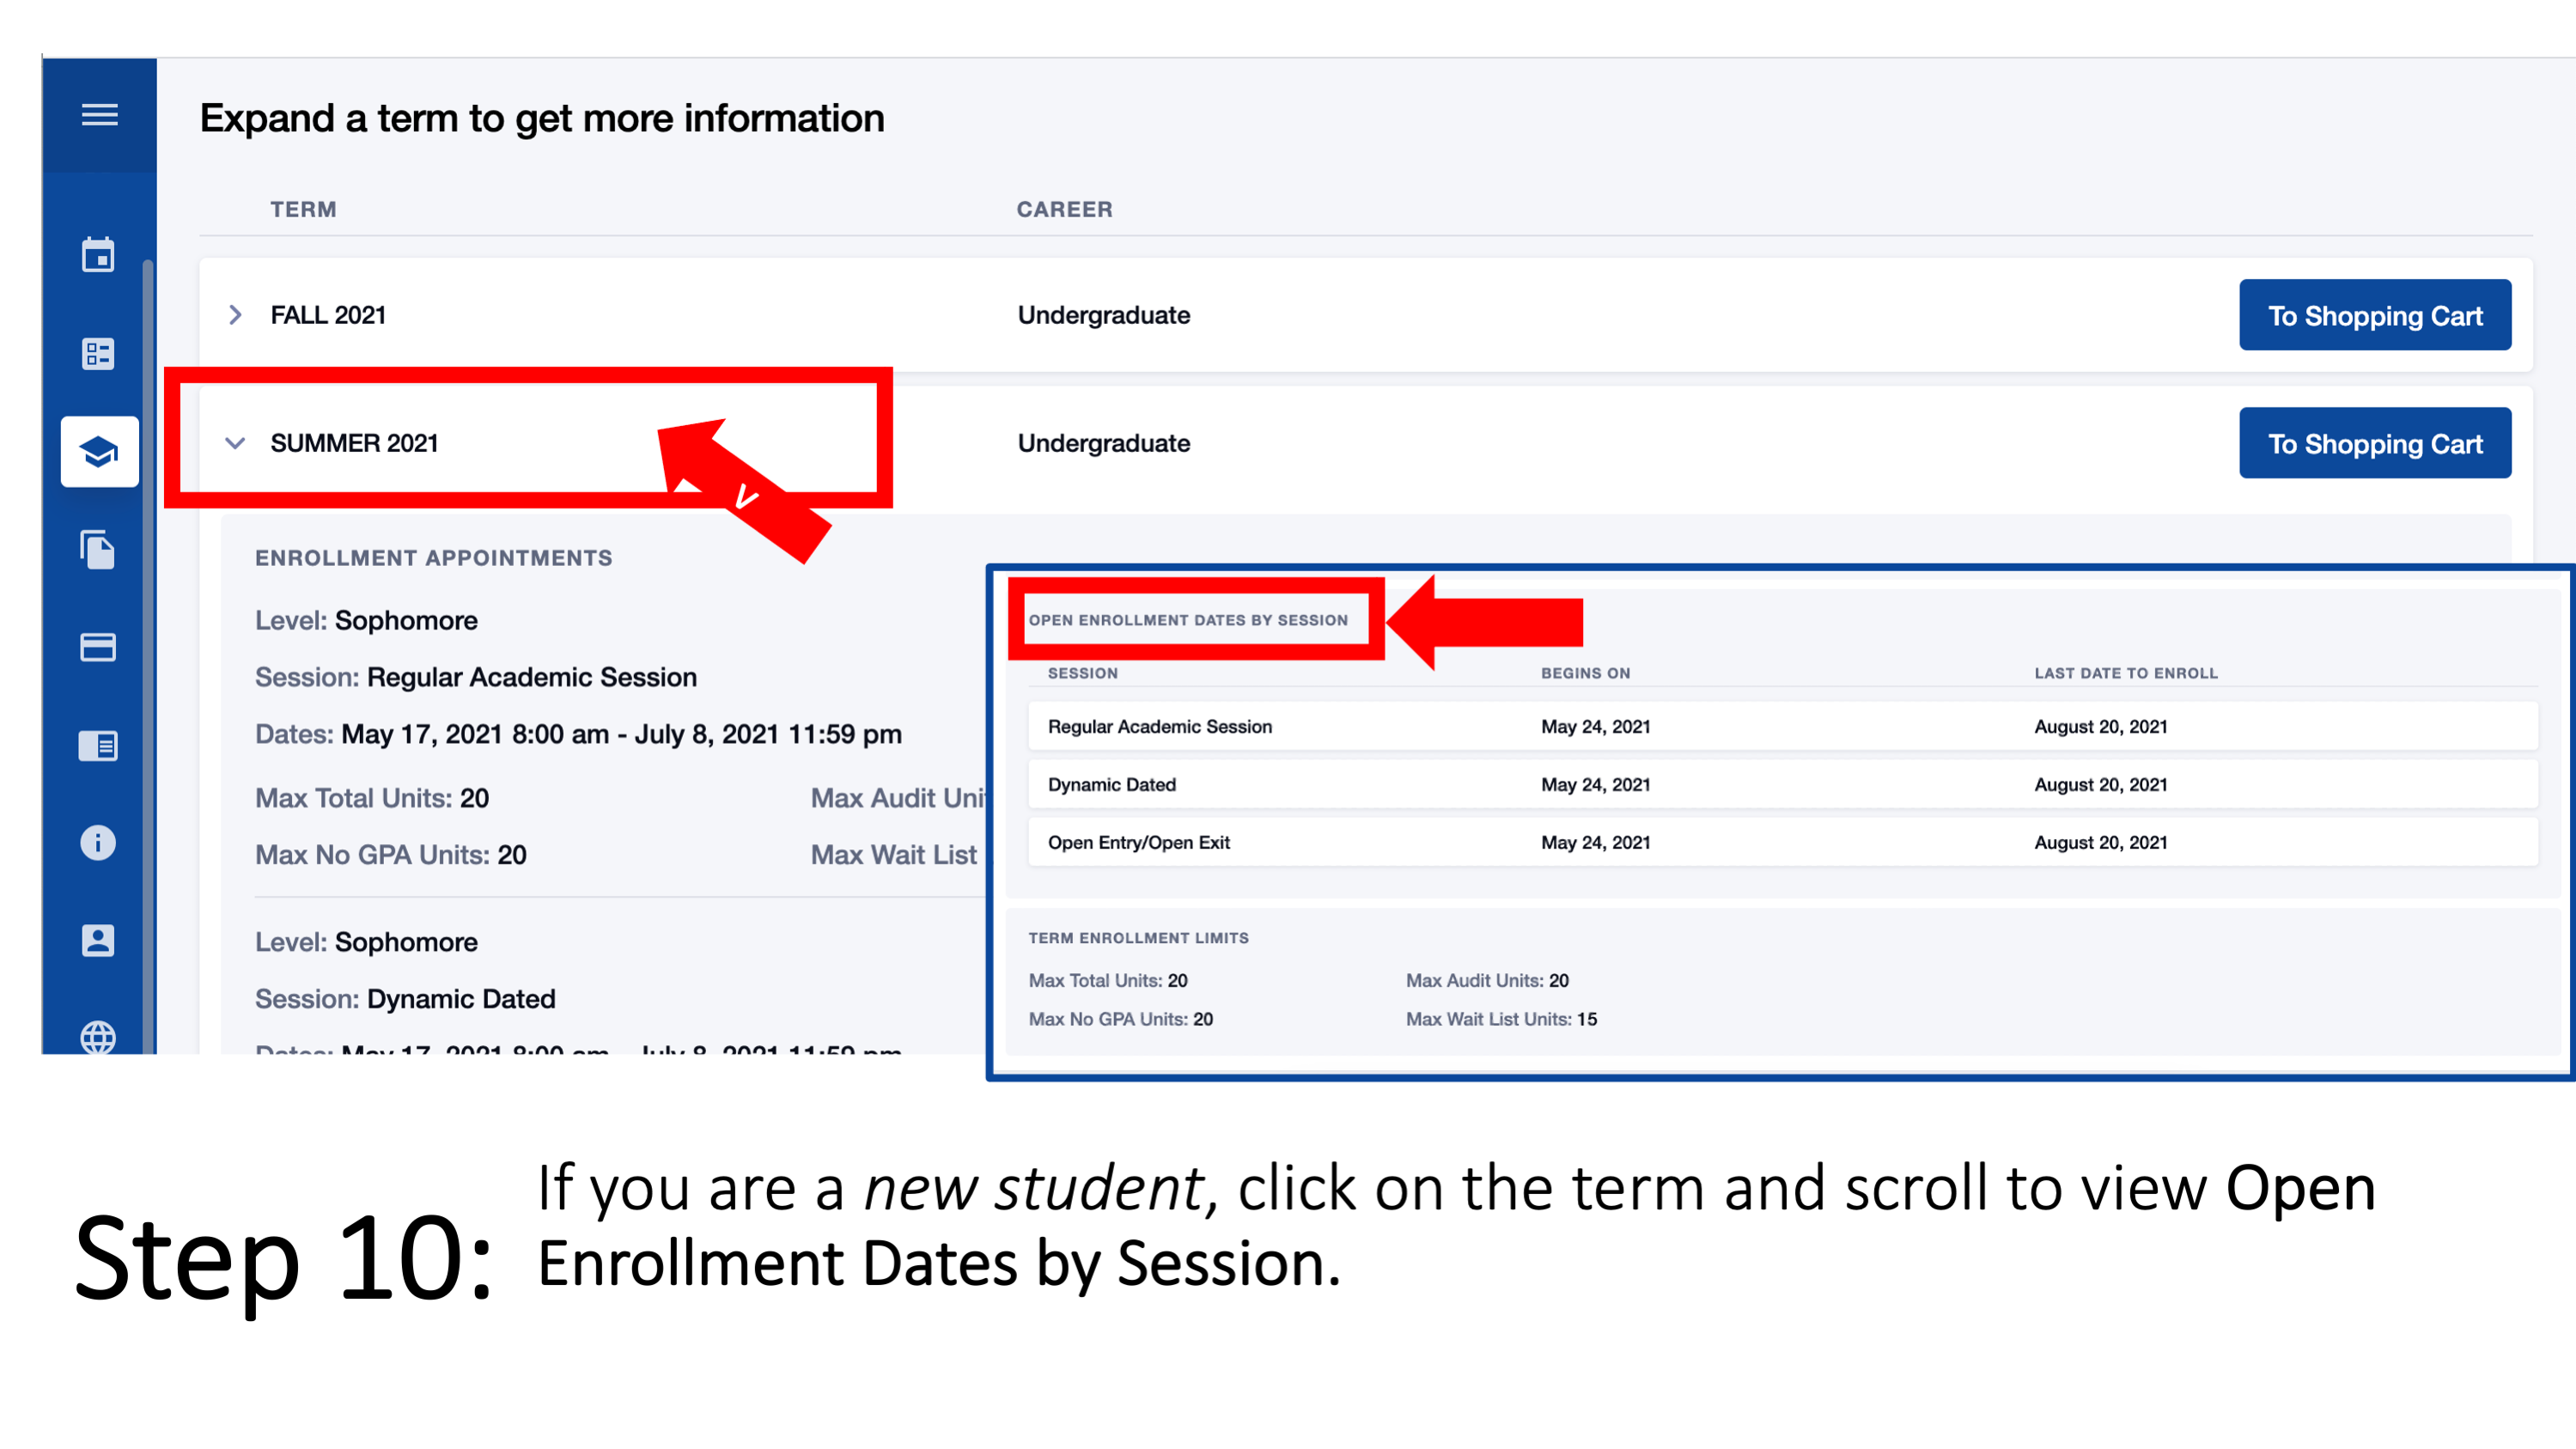 Step 10: If you are a new student, click on the term and scroll to view Open Enrollment Dates by Session.